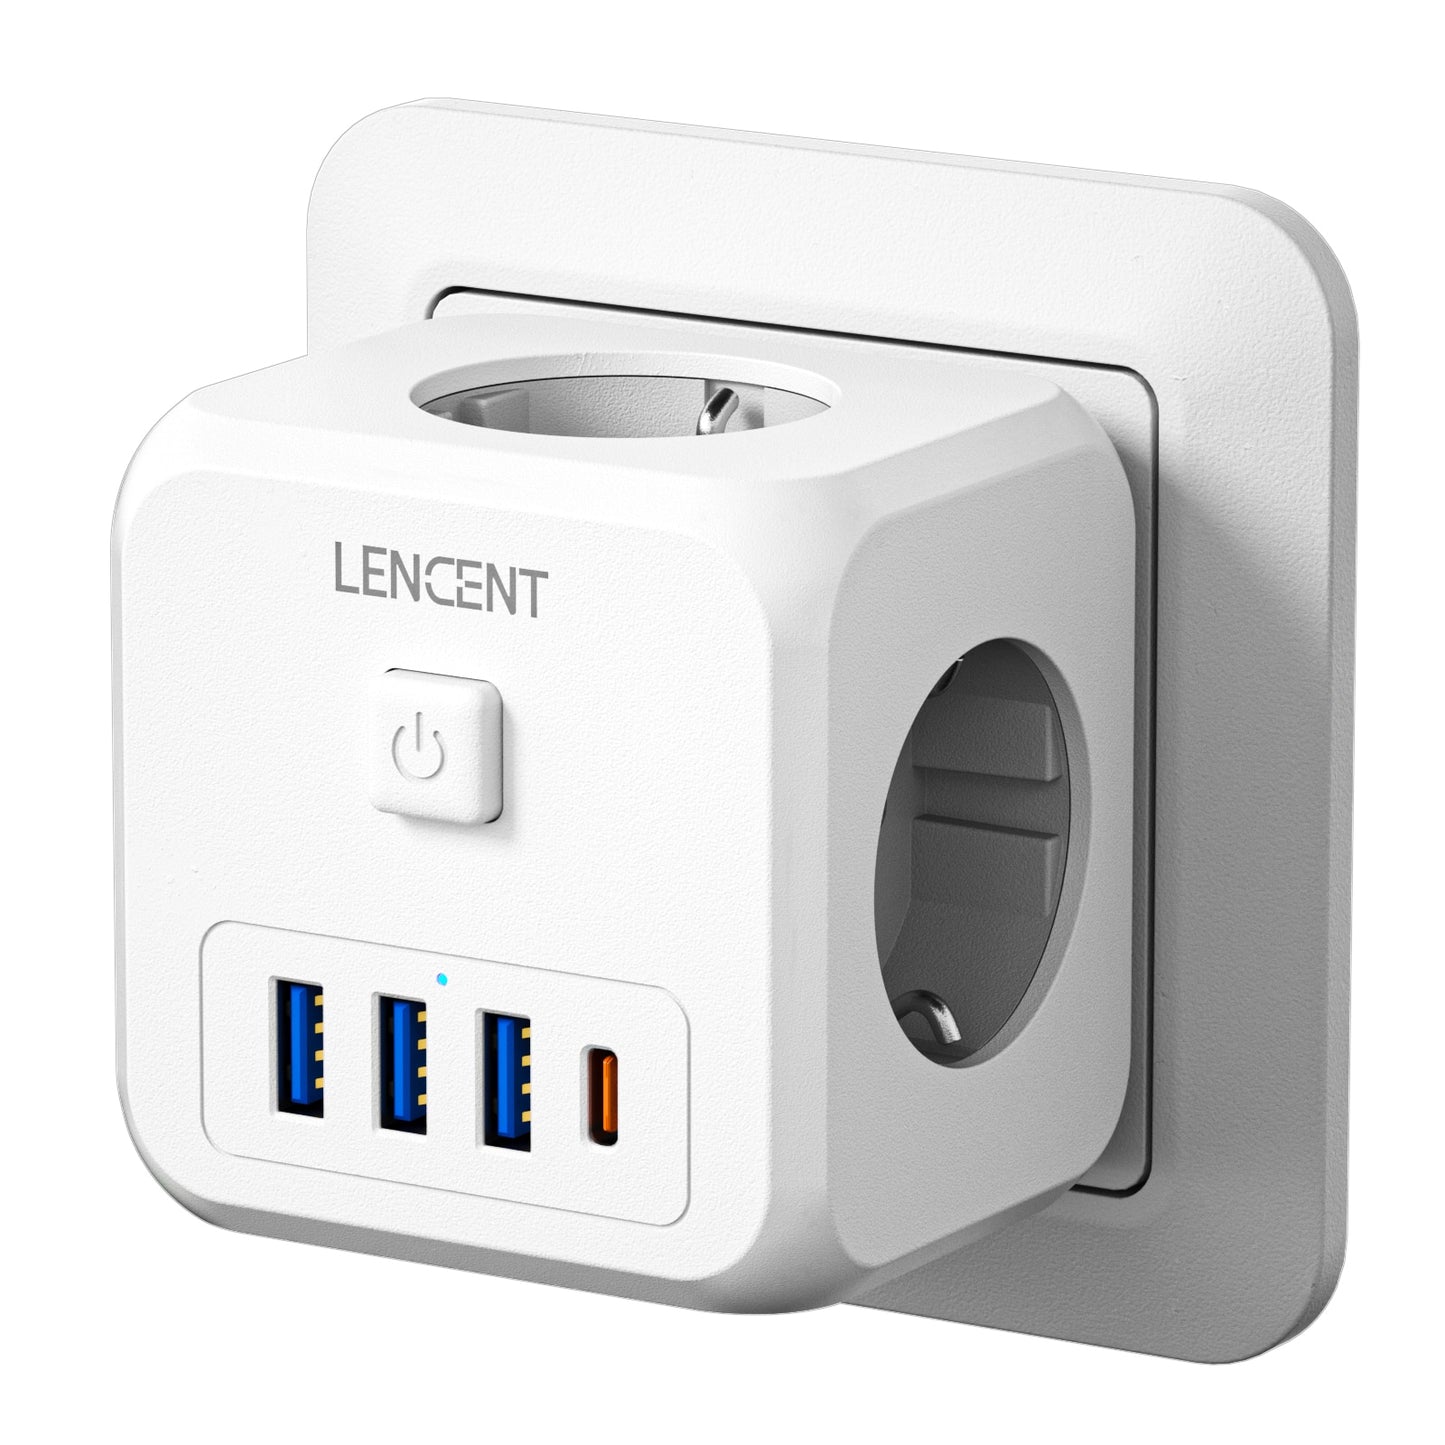 LENCENT EU Plug Power Strip with  3 AC Outlets +3 USB Charging Ports+ 1 Type C 5V 2.4A  Adapter 7-in-1 Plug Socket On/Off Switch